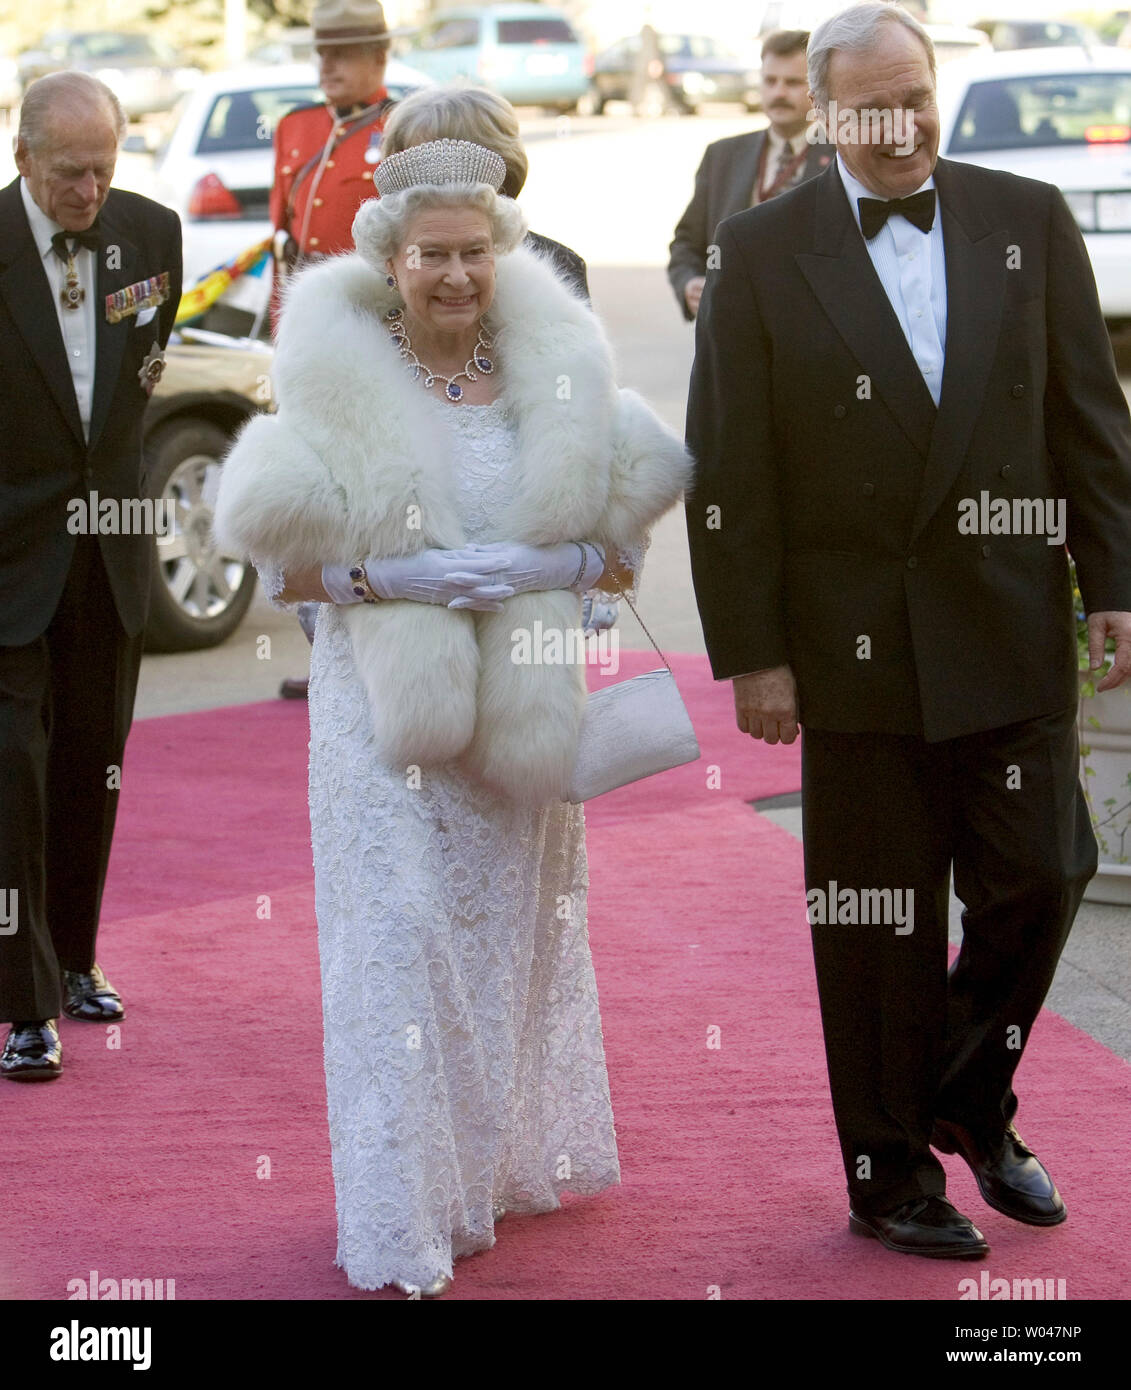 Queen Elizabeth is escorted by Canada's Prime Minister Paul Martin to the Government of Canada dinner in Edmonton, Alberta on May 24, 2005.  (UPI Photo / Heinz Ruckemann) Stock Photo